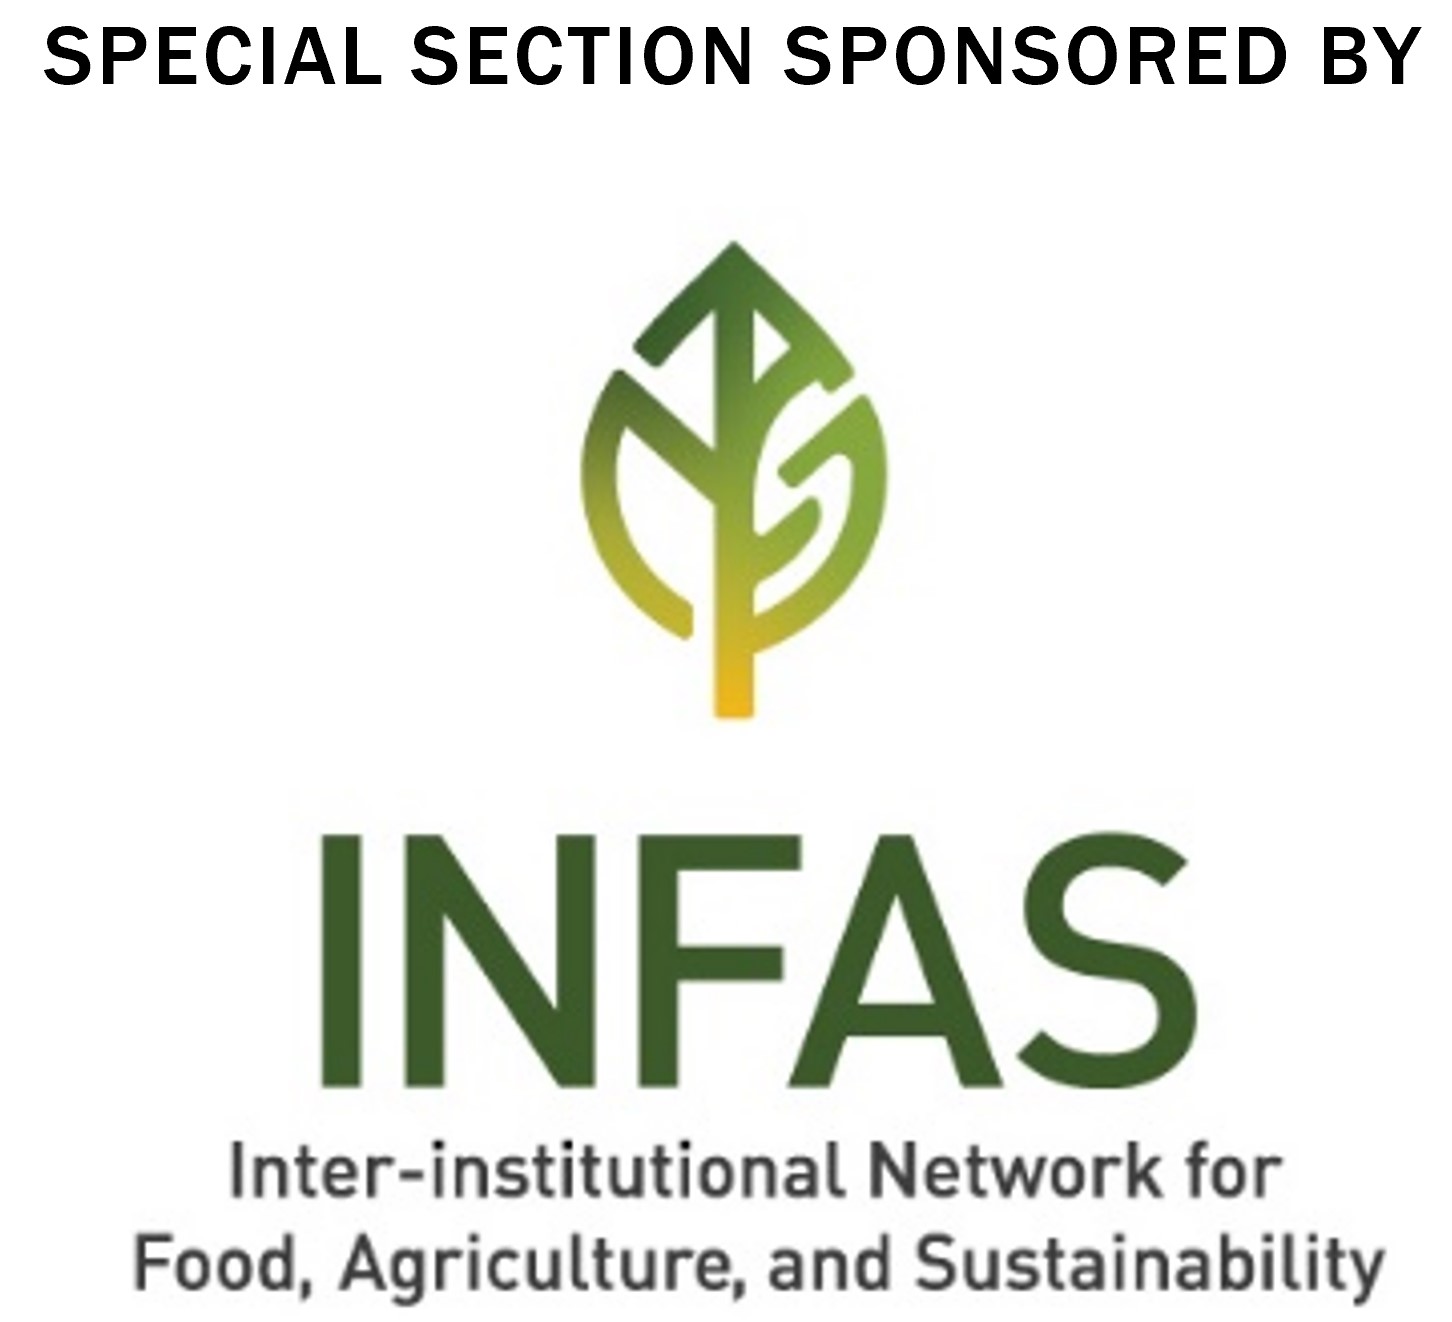 Special section sponsored by INFAS (logo for this section)